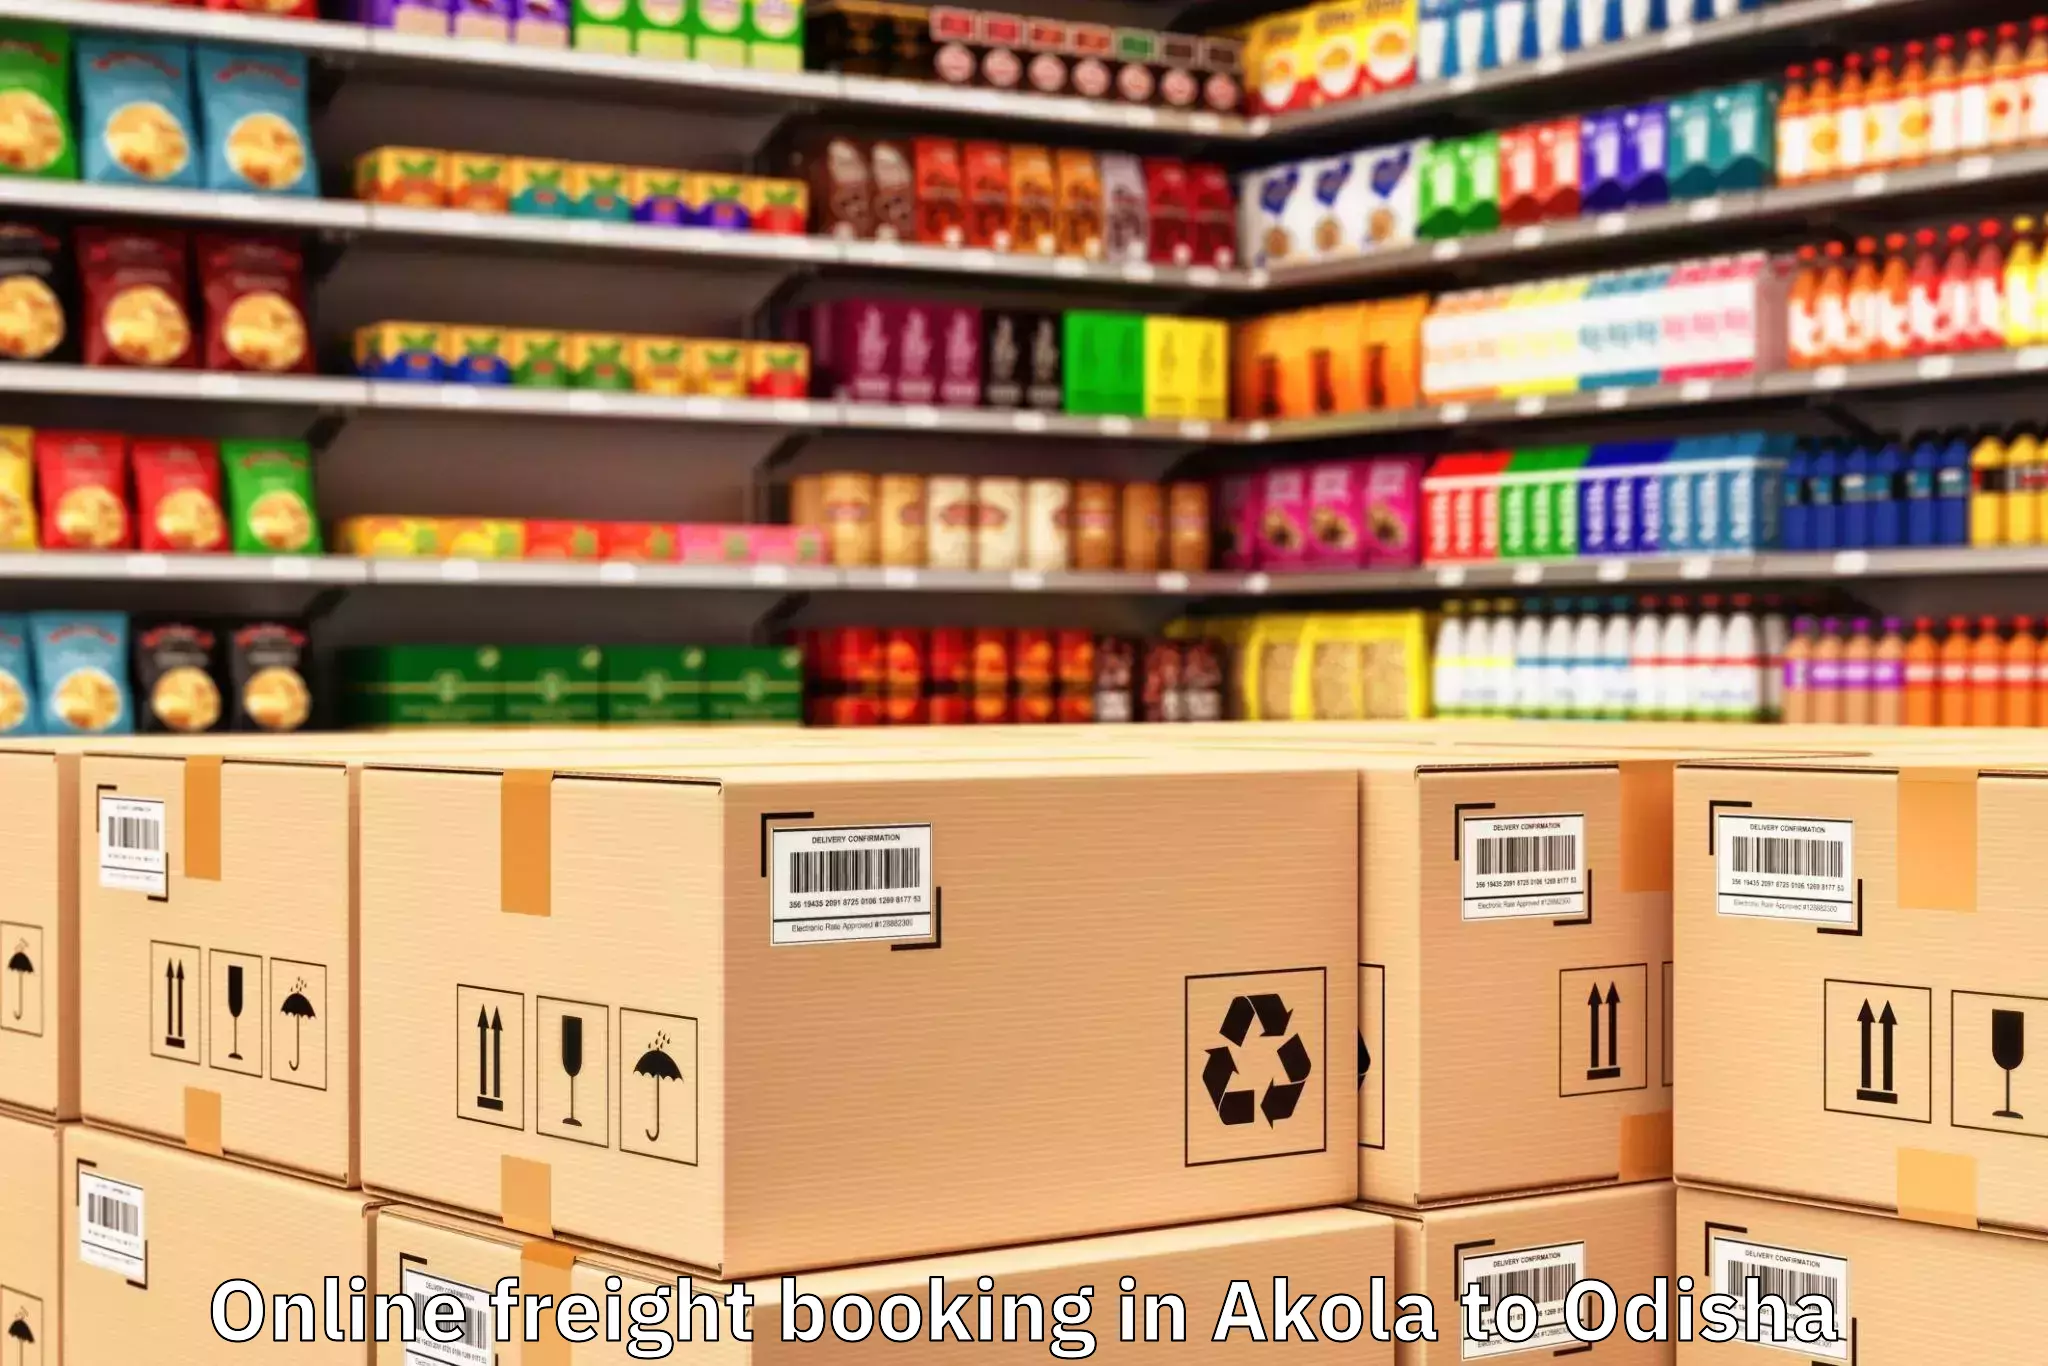 Book Your Akola to Kodala Online Freight Booking Today